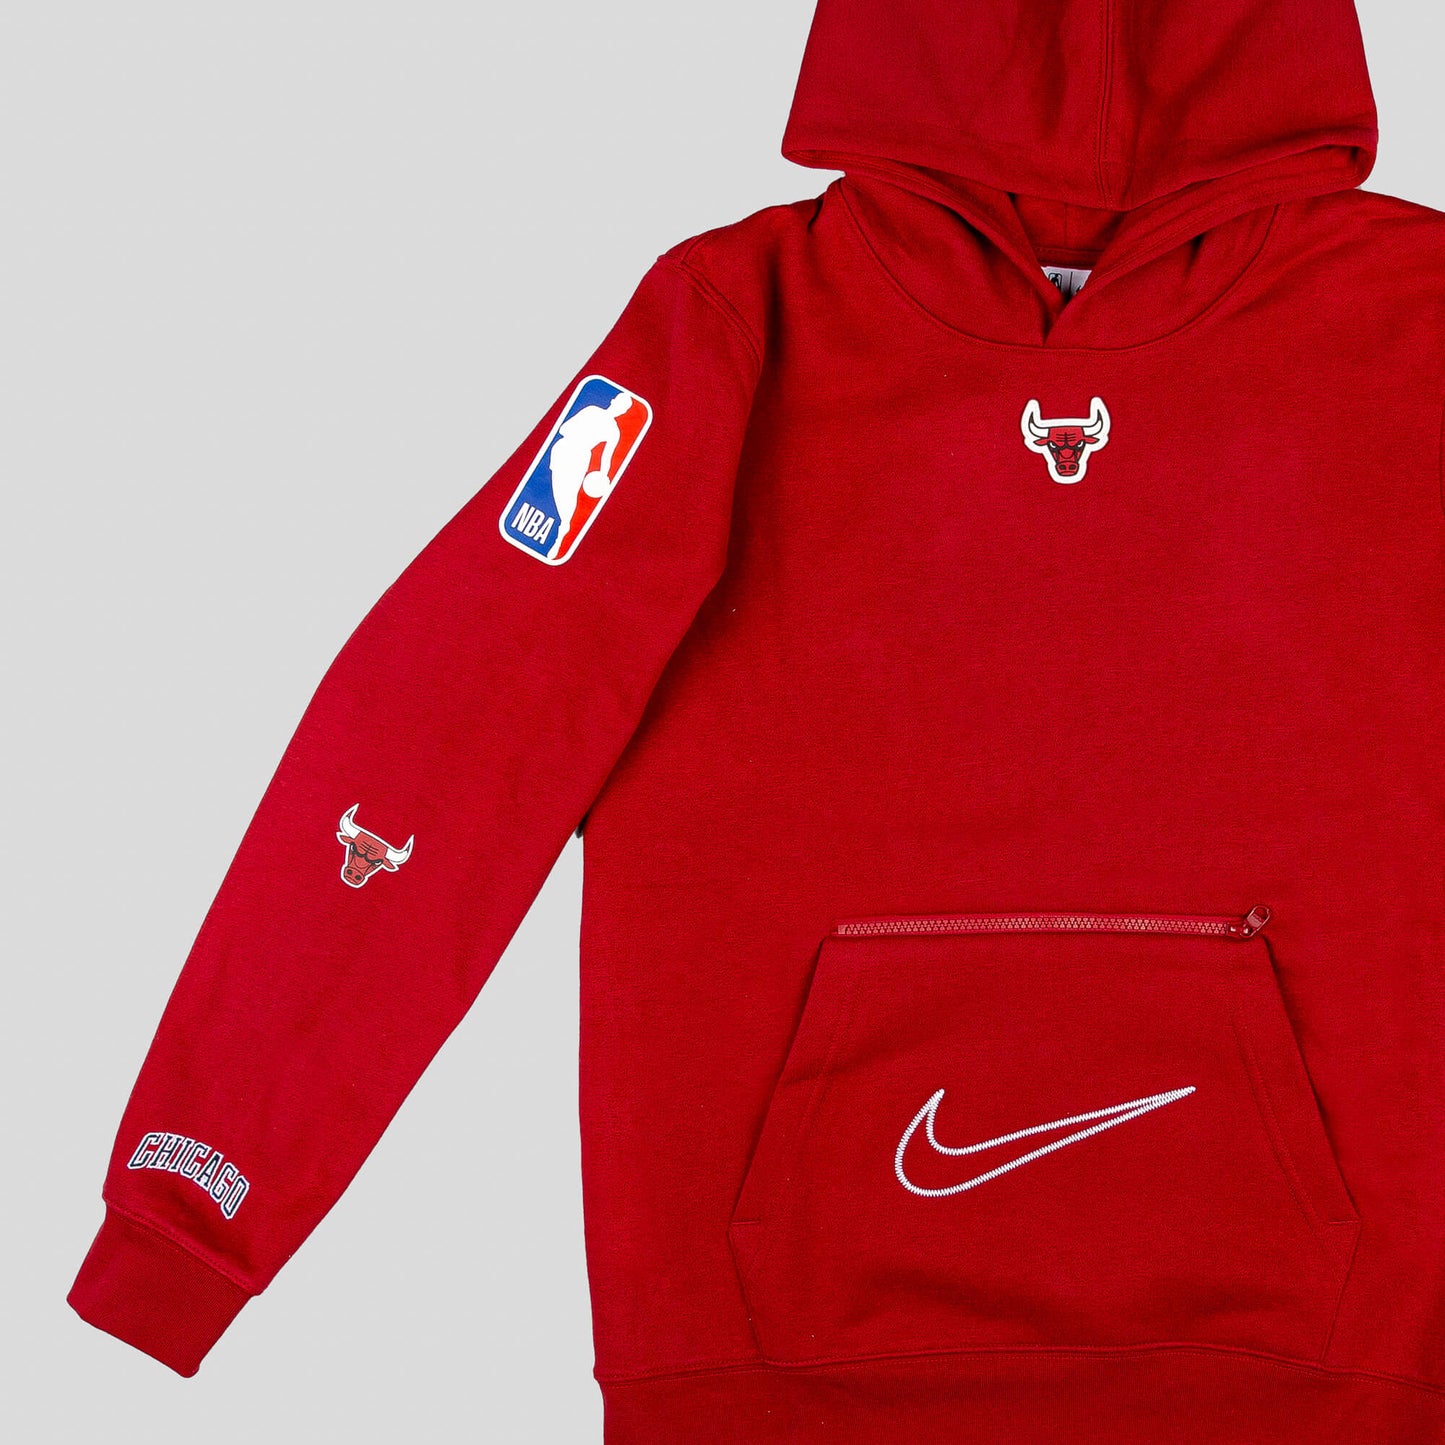 Nike Nk Fleece Pullover Courtside Ce - 8-20Y - Chicago Bulls Red